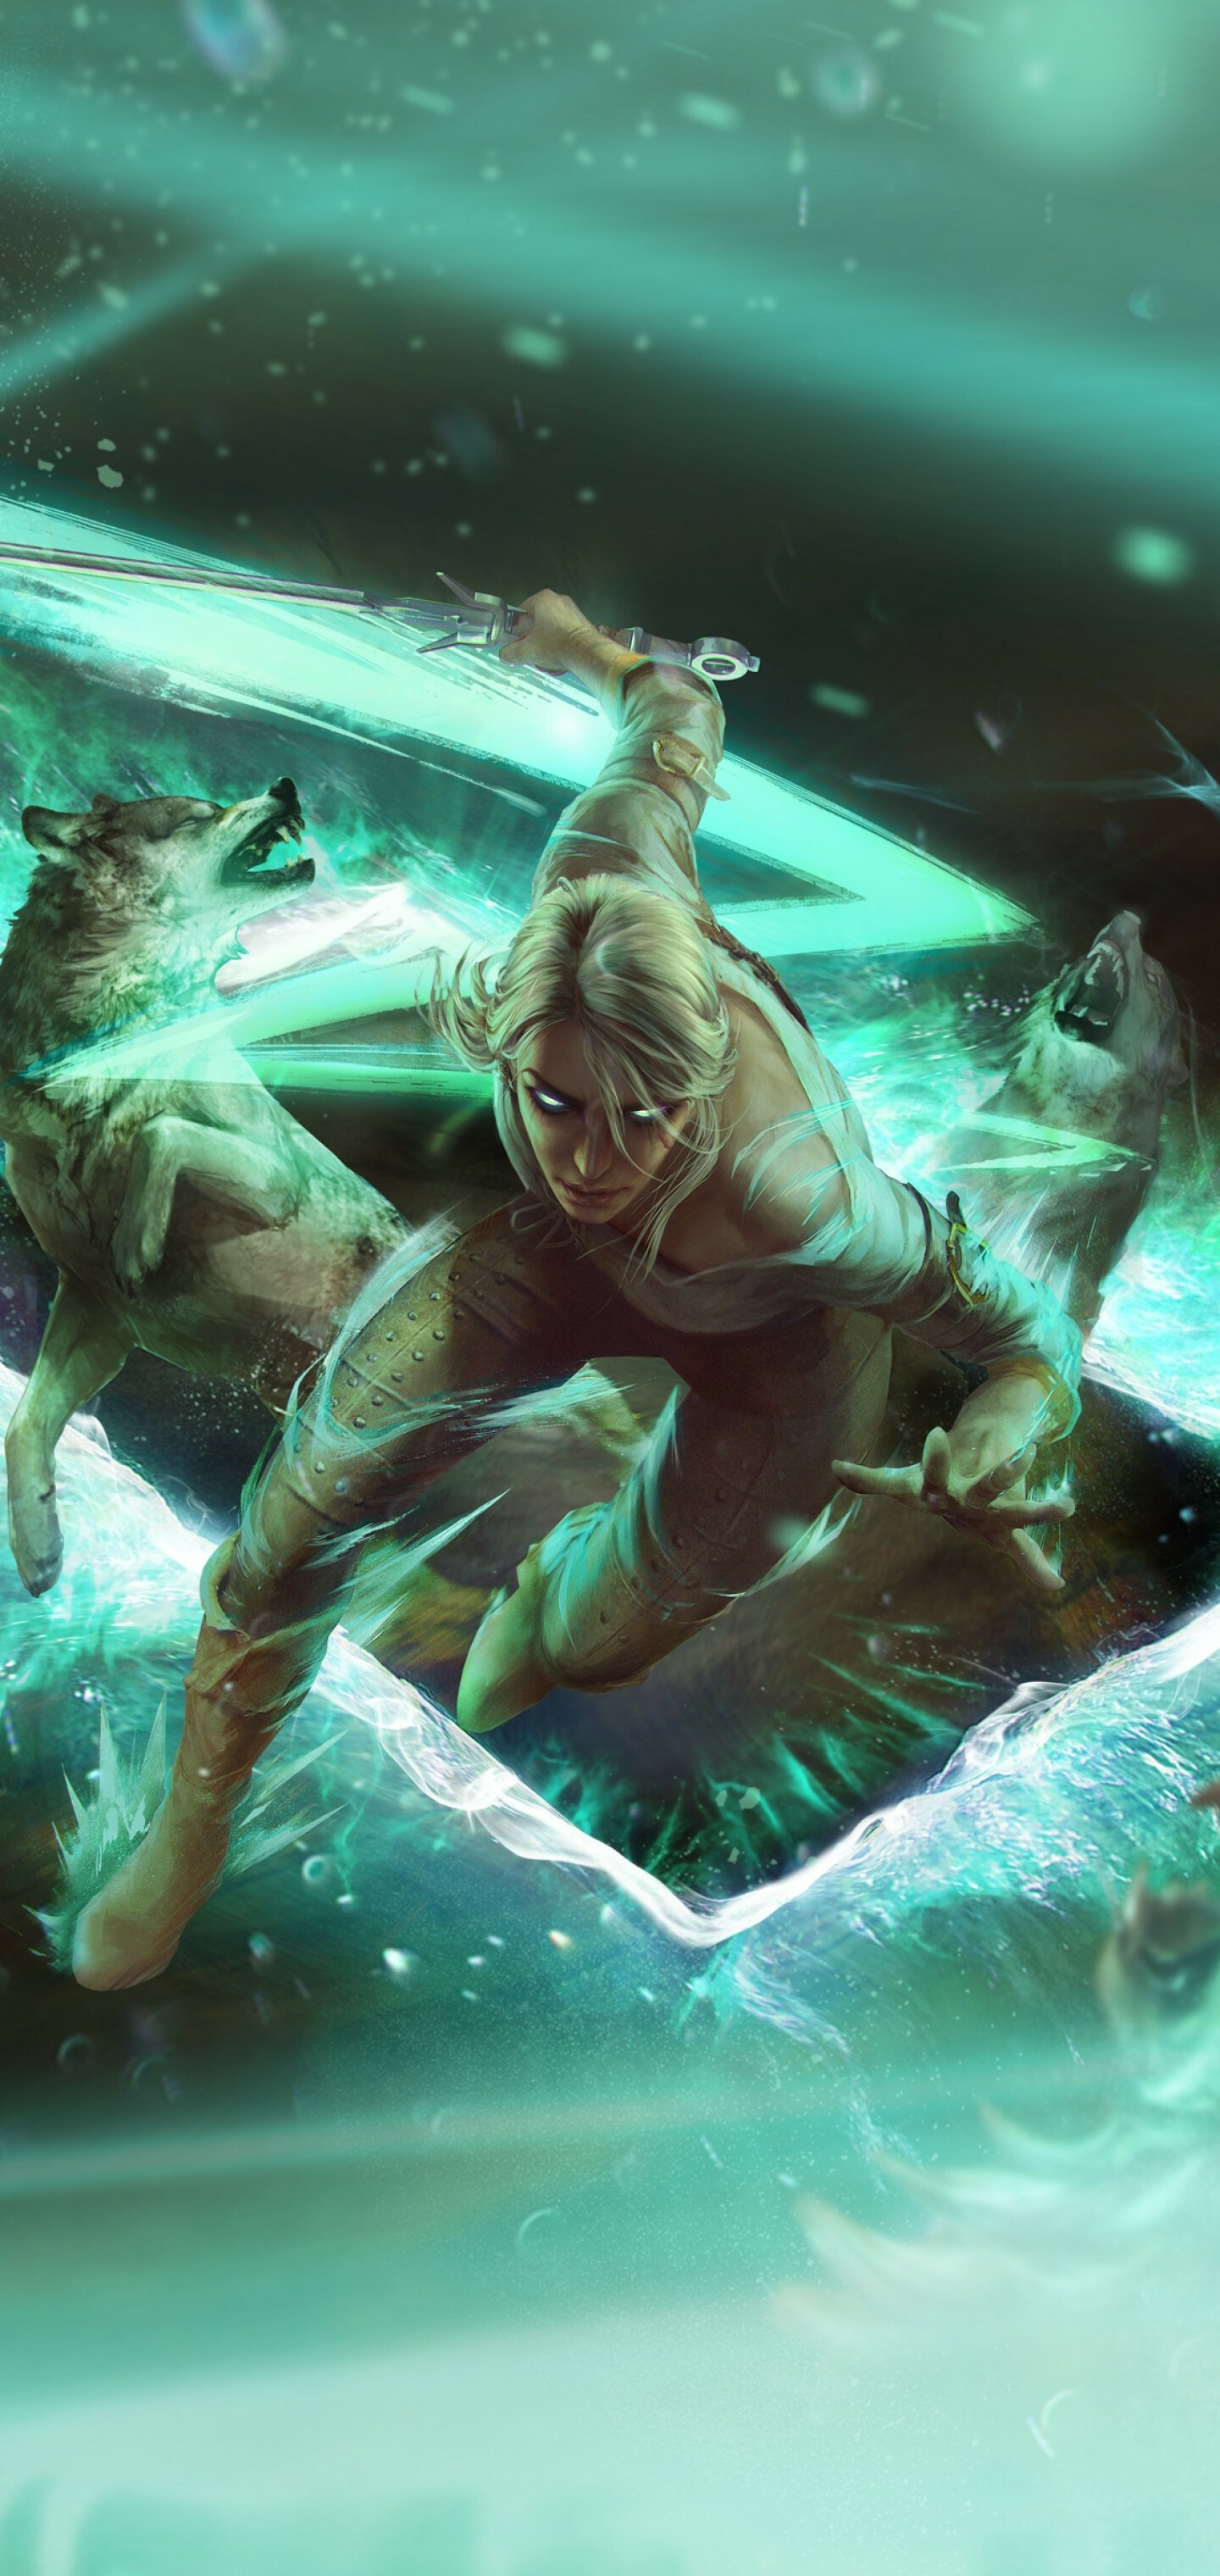 The Witcher (Game): Card Game, Ciri, Wolves, Action RPG. 1440x3040 HD Wallpaper.